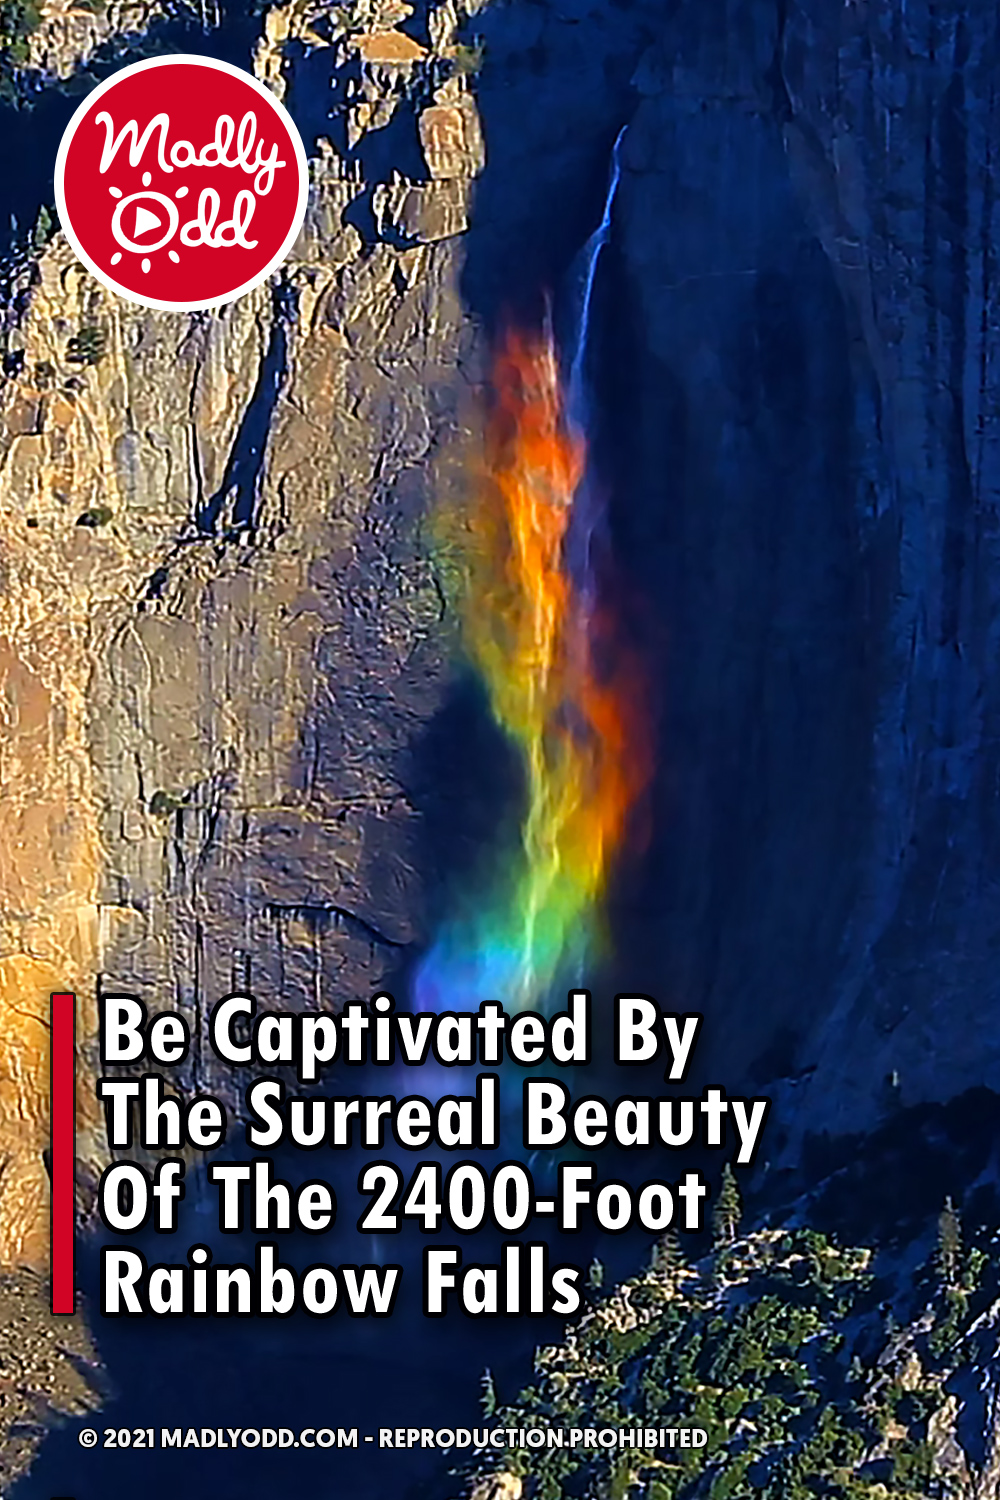 Be Captivated By The Surreal Beauty Of The 2400-Foot Rainbow Falls